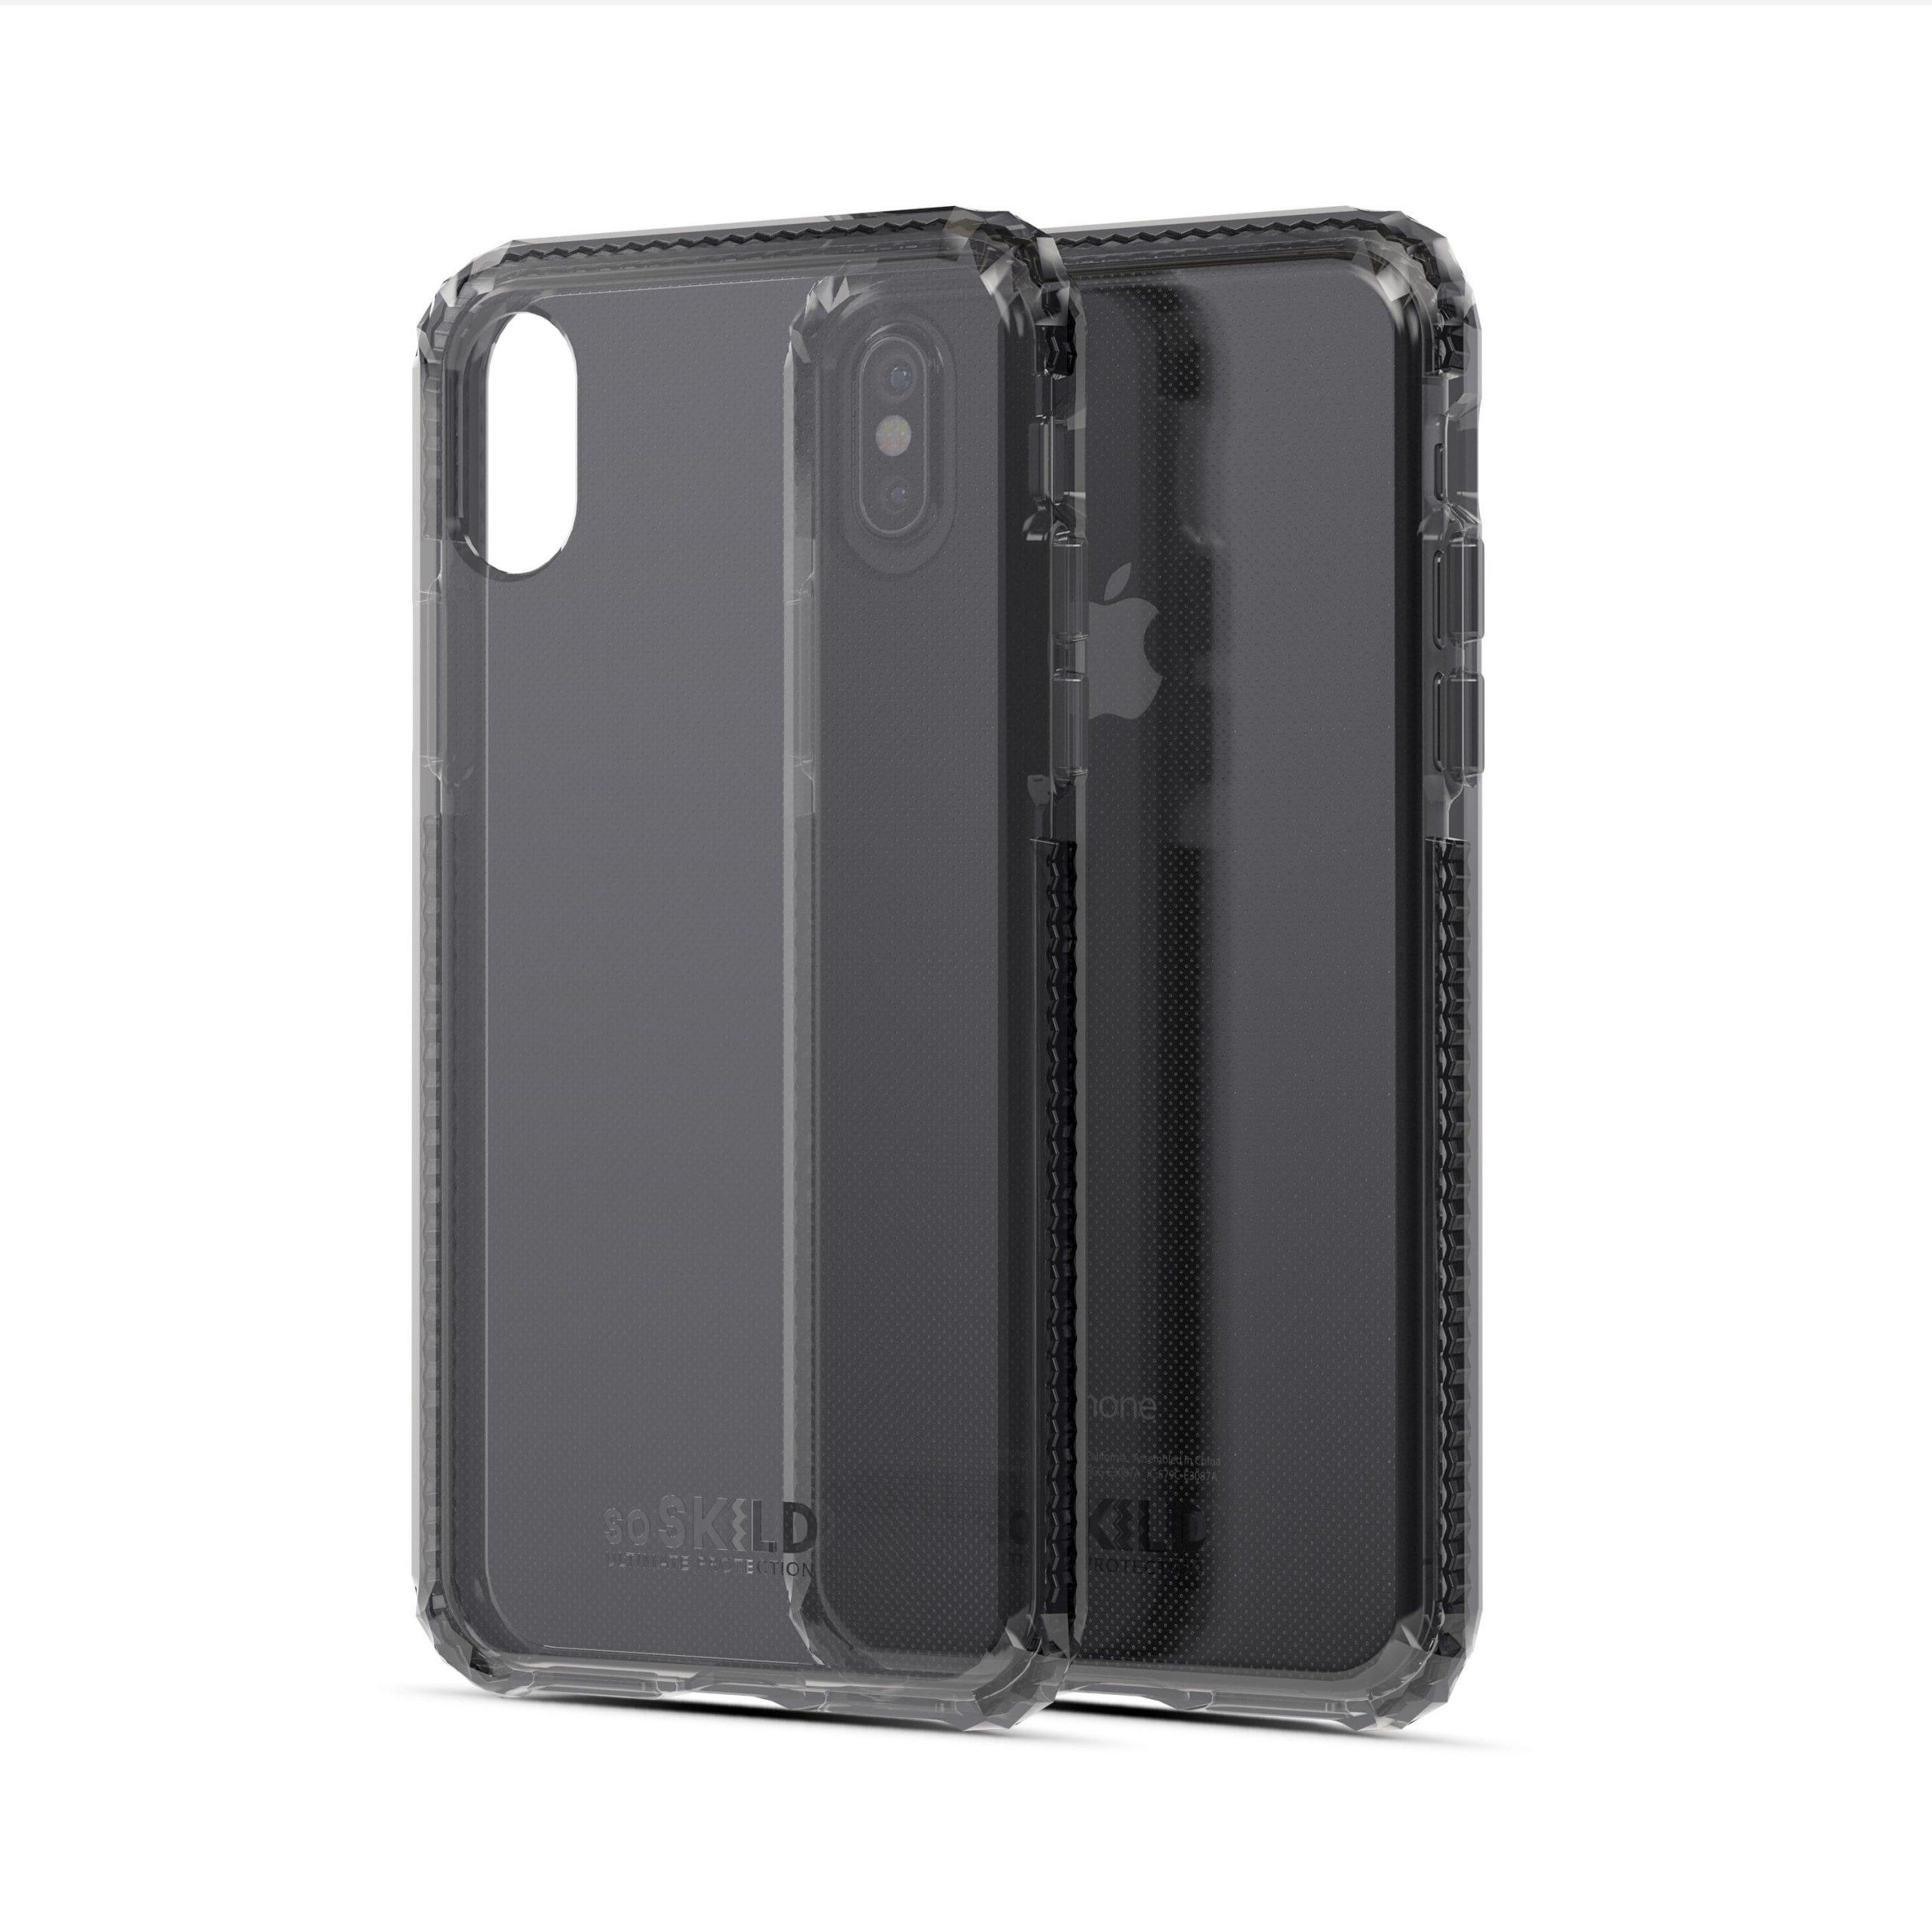 SoSkild so skild iphone xs max defend heavy impact case and smokey grey tempered glass screen protector